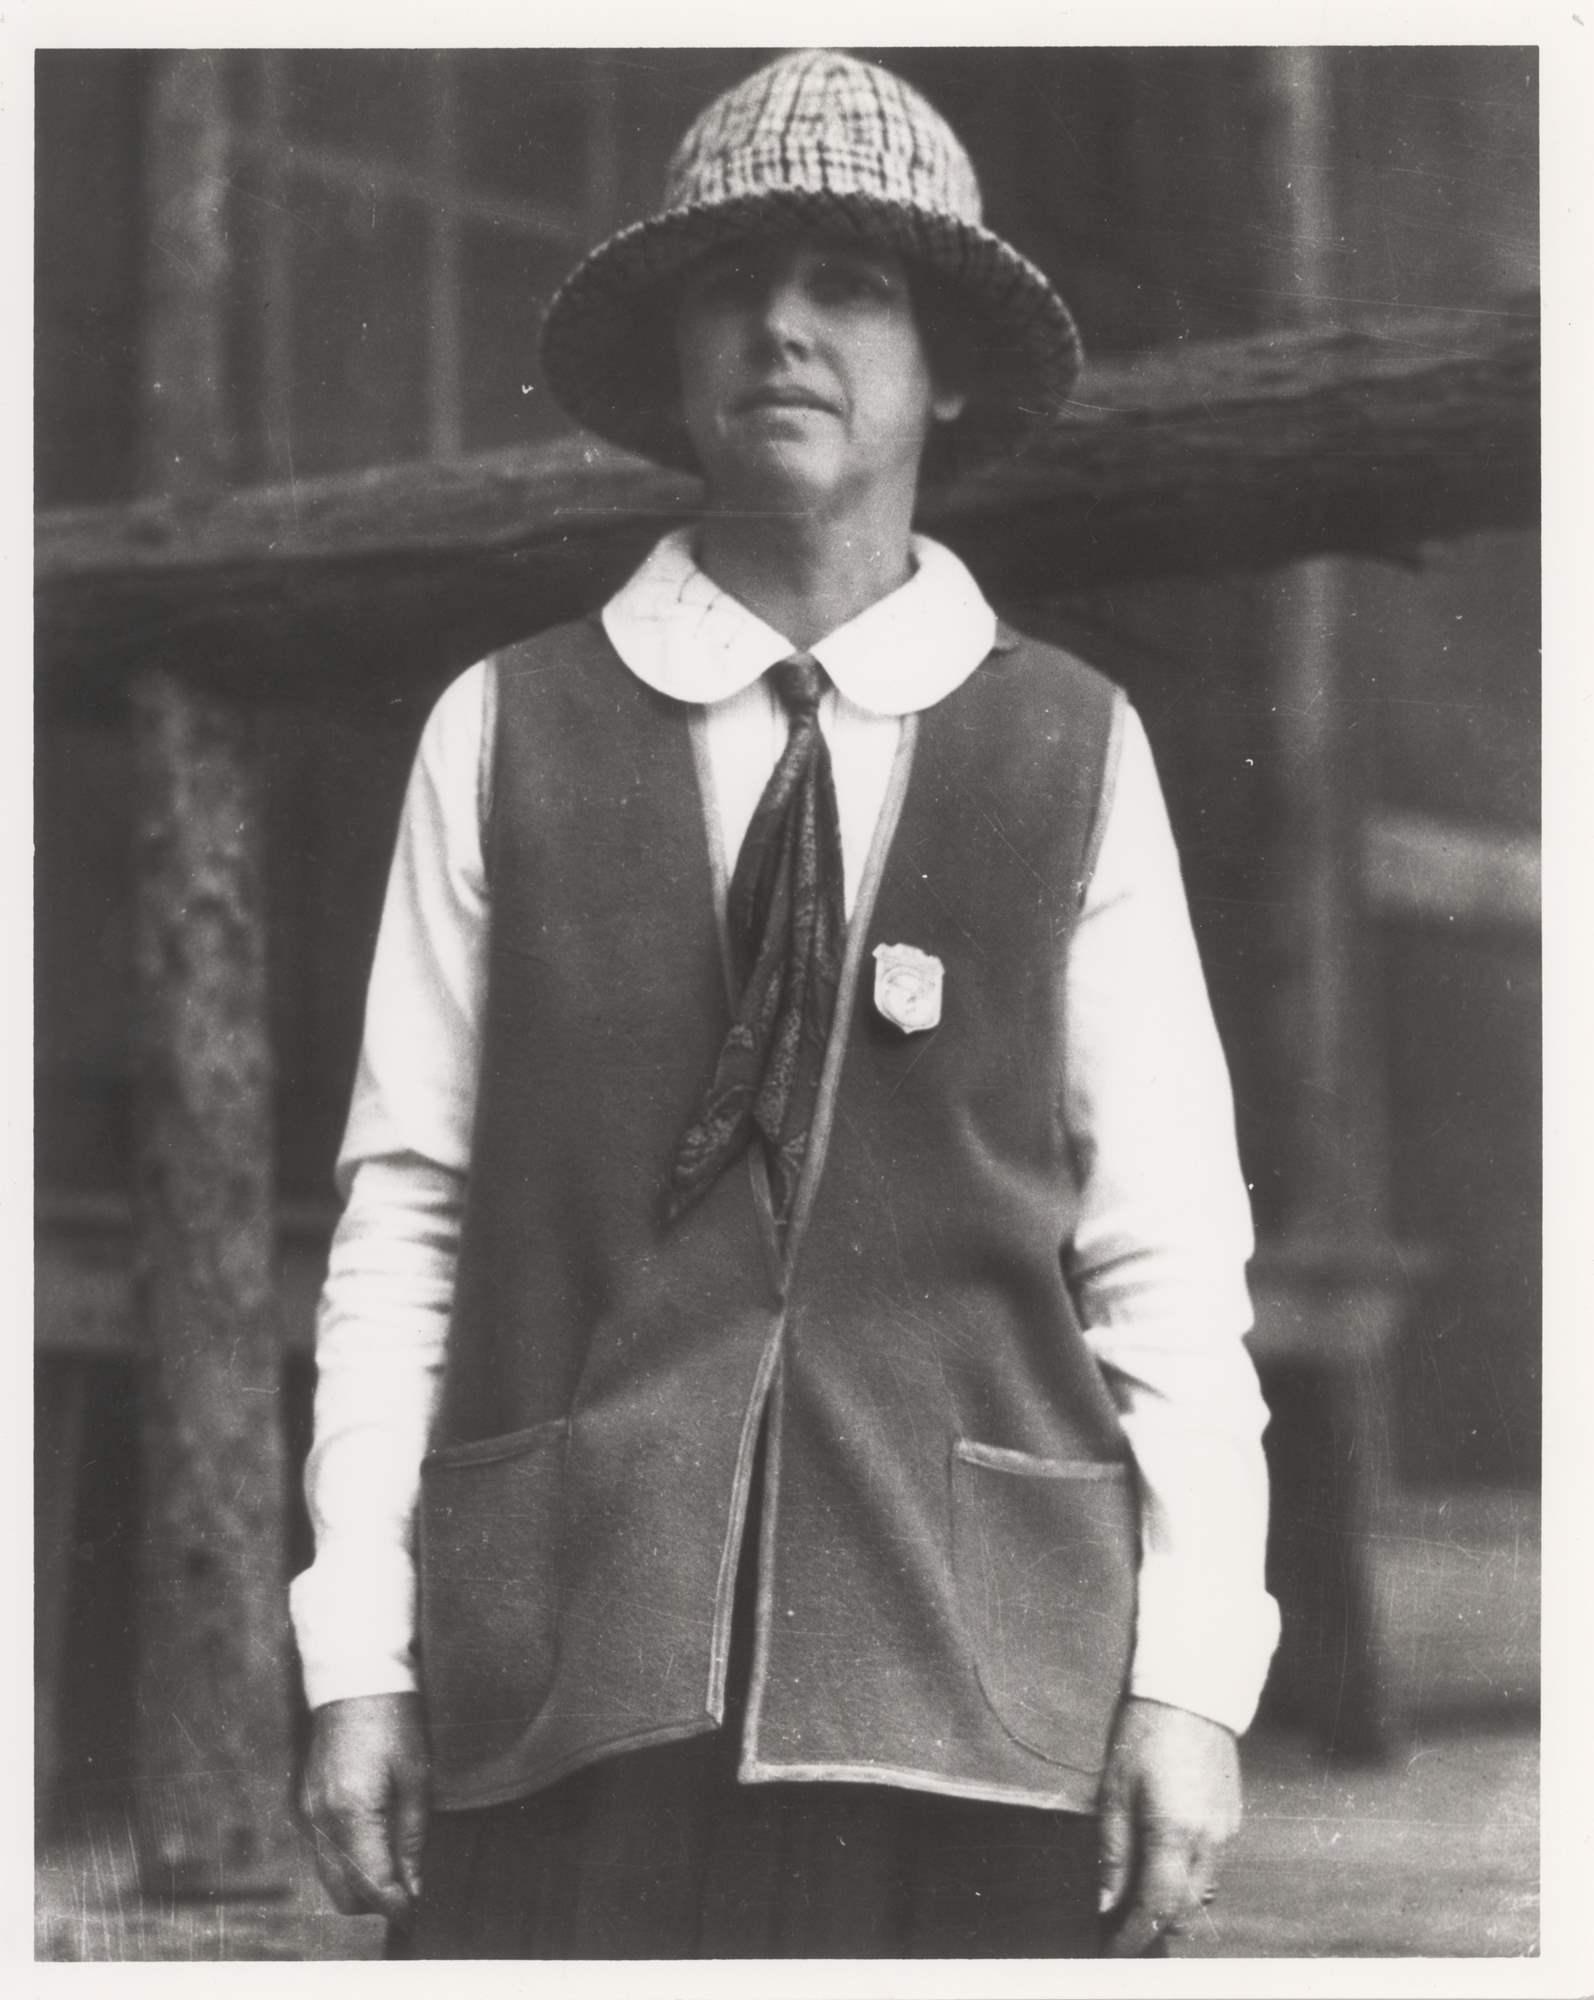 Martha Bingaman poses wearing a skirt, blouse, scarf, soft brimmed hat, and vest. She has a shield-shaped badge pinned to the vest.